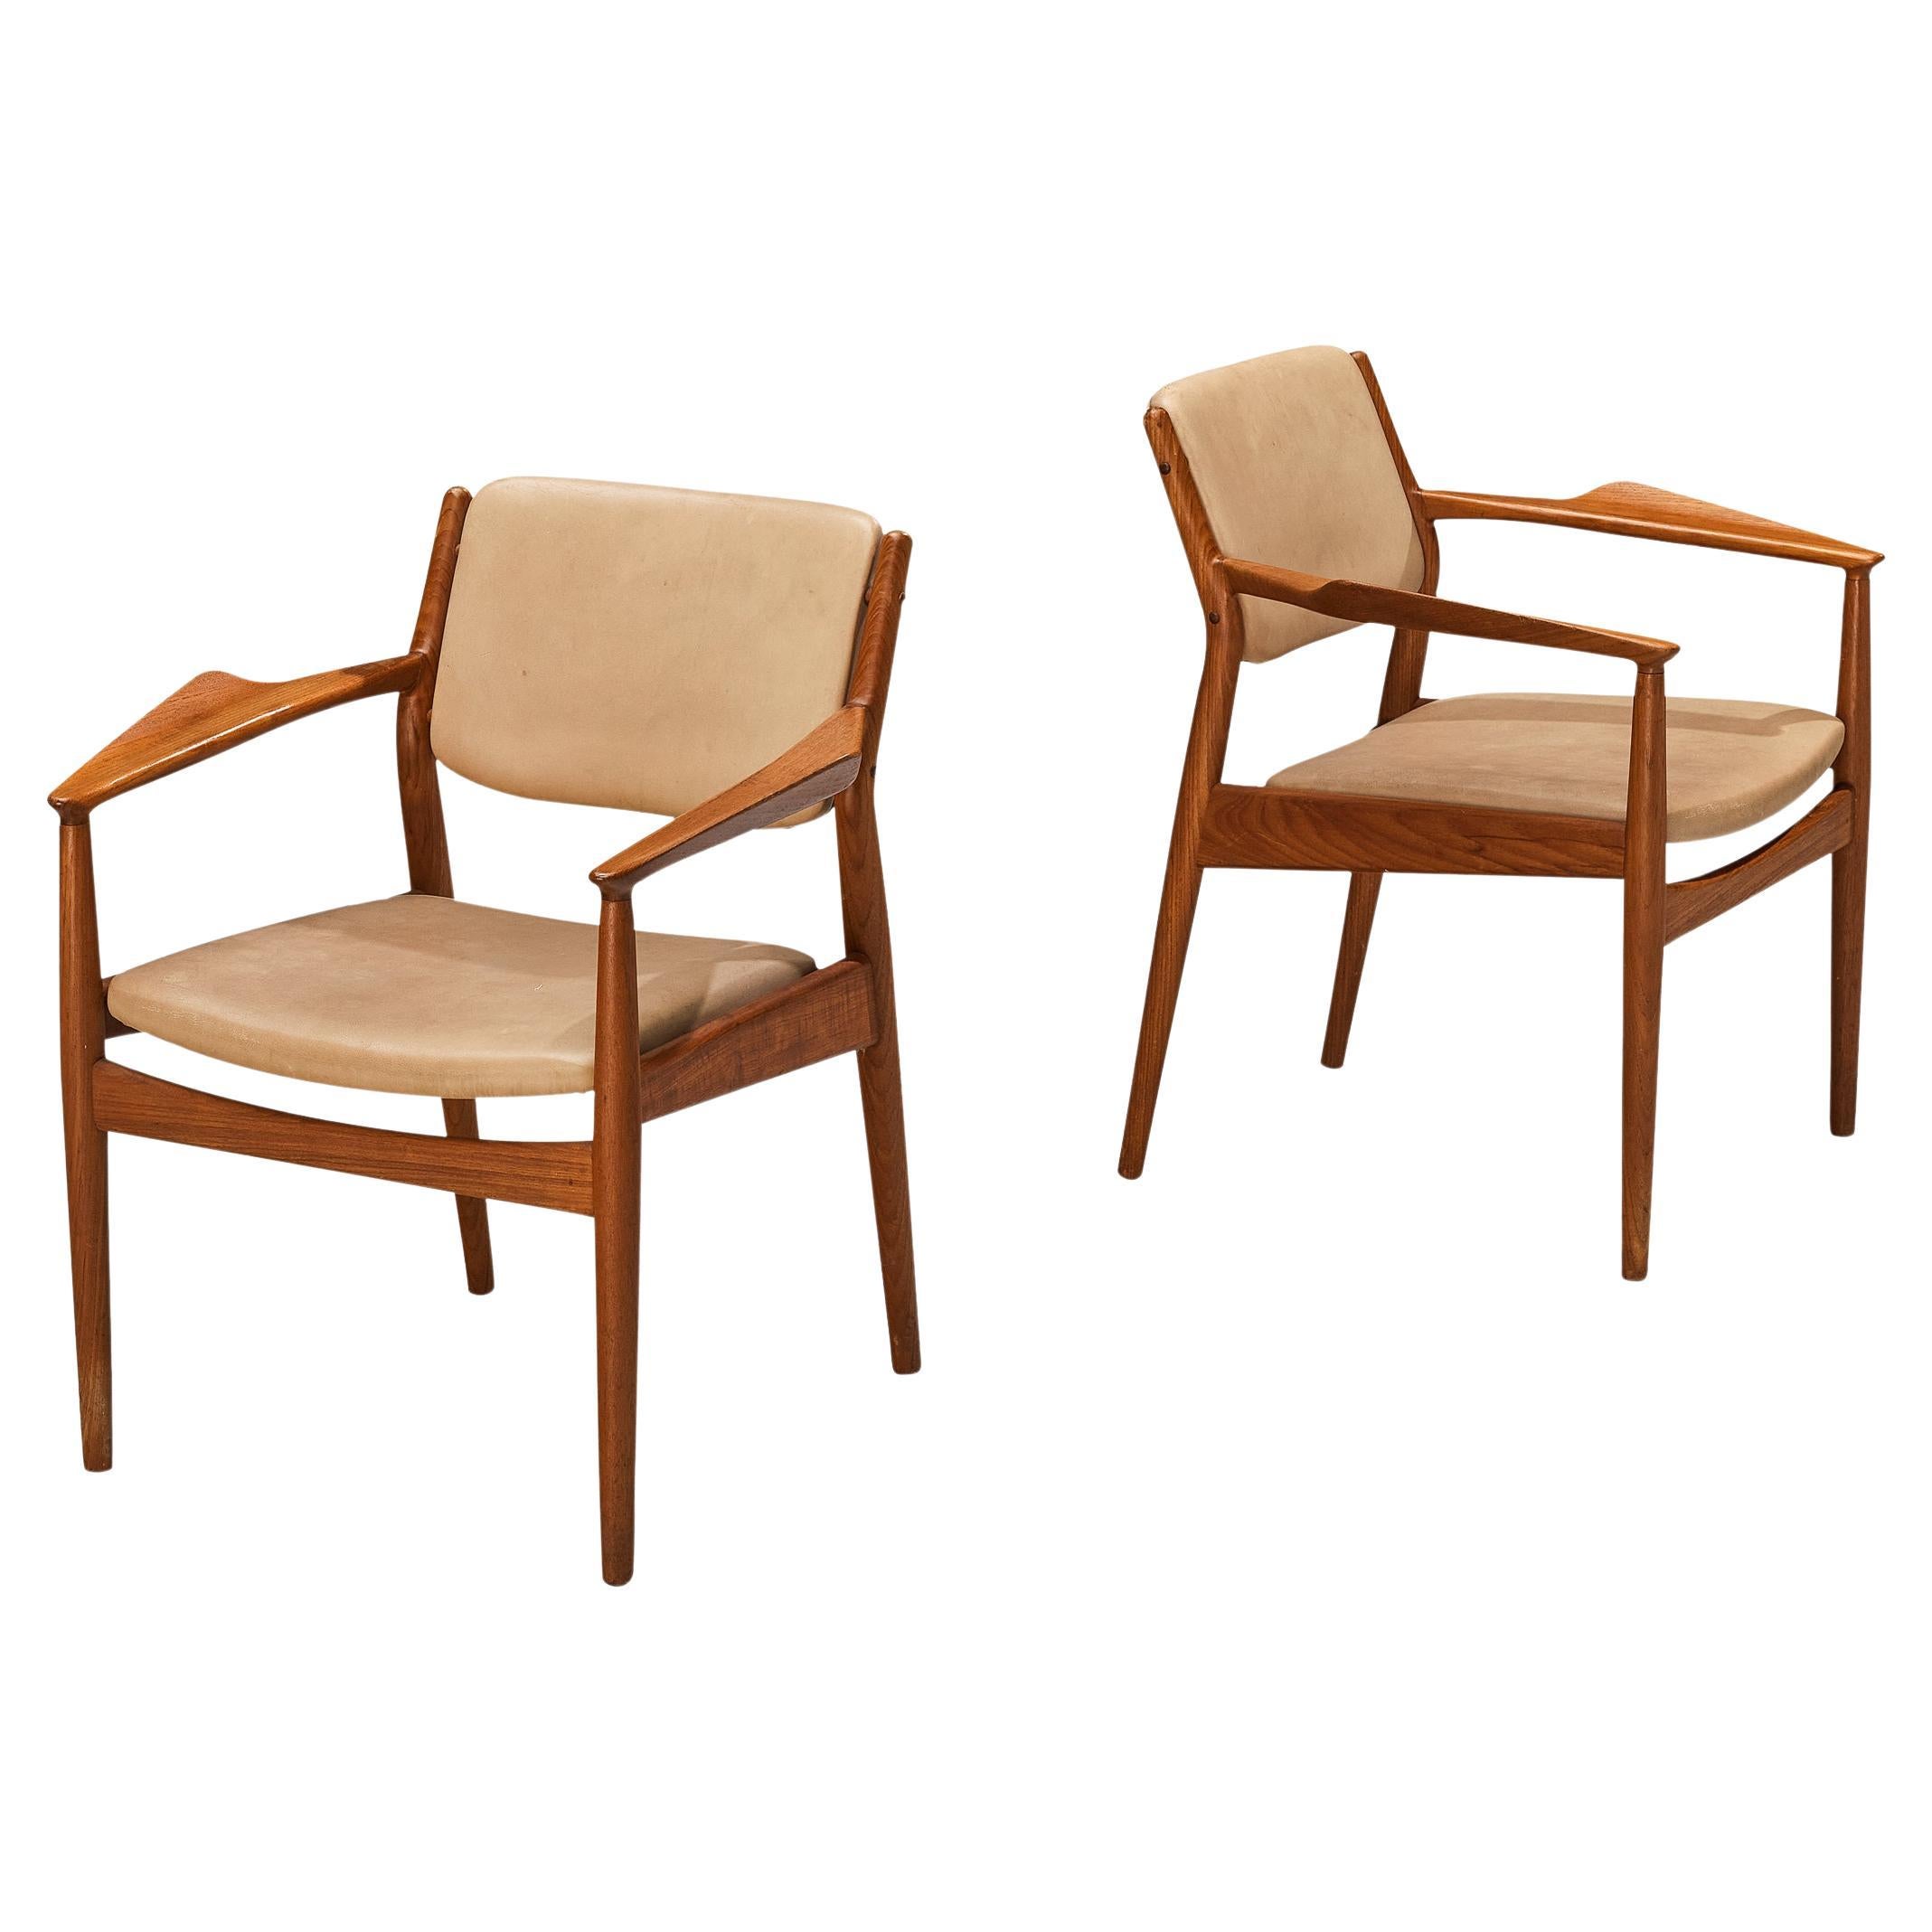 Arne Vodder for Sibast Pair of Armchairs in Teak and Beige Upholstery 